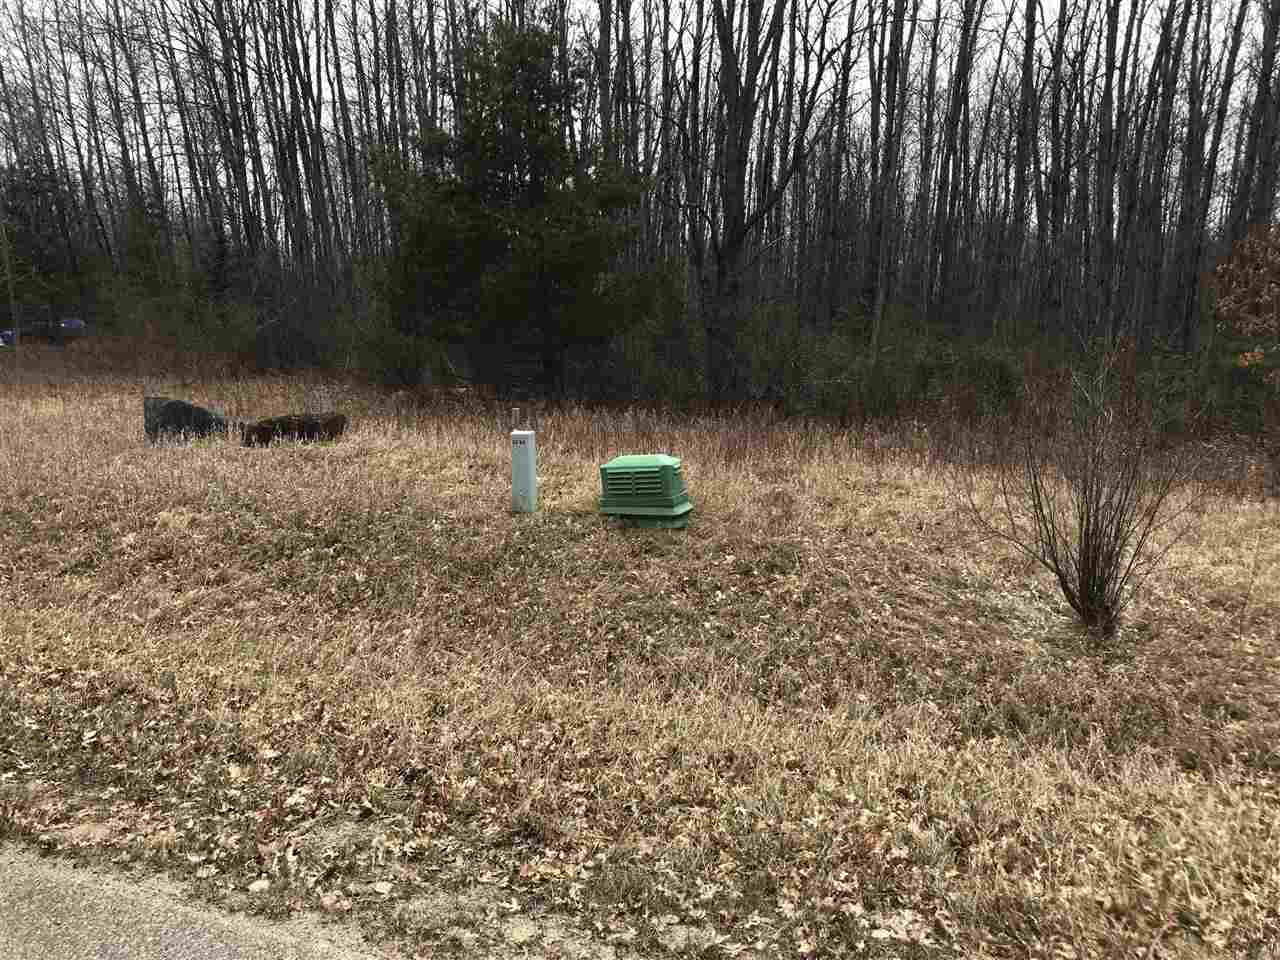 Nice quiet location near a cul-de-sac for camping or building.   This is an unimproved and will require a sewer connection to camp.  Please call Butman Twp Sewer Dept for cost and details   989-426-9955.  Lot back up to a common area for additional privacy and wildlife.    Ownership provides access to an 18 hole golf course , restaurant/pub, fitness center, indoor heated pool, tennis/bocce ball courts, chalet/sledding hill, walking (nature) trails, activity bldg, storage area, 2 all sports lakes, Lk Lancer/Lancelot, 15 beach clubs (5 with beach/bath house). Or fly to/from Sugar Springs off a 3500ft well maintained grass airpark.   www.airnav.com   5M6.    ALL just 2-1/2 hours from Detroit!